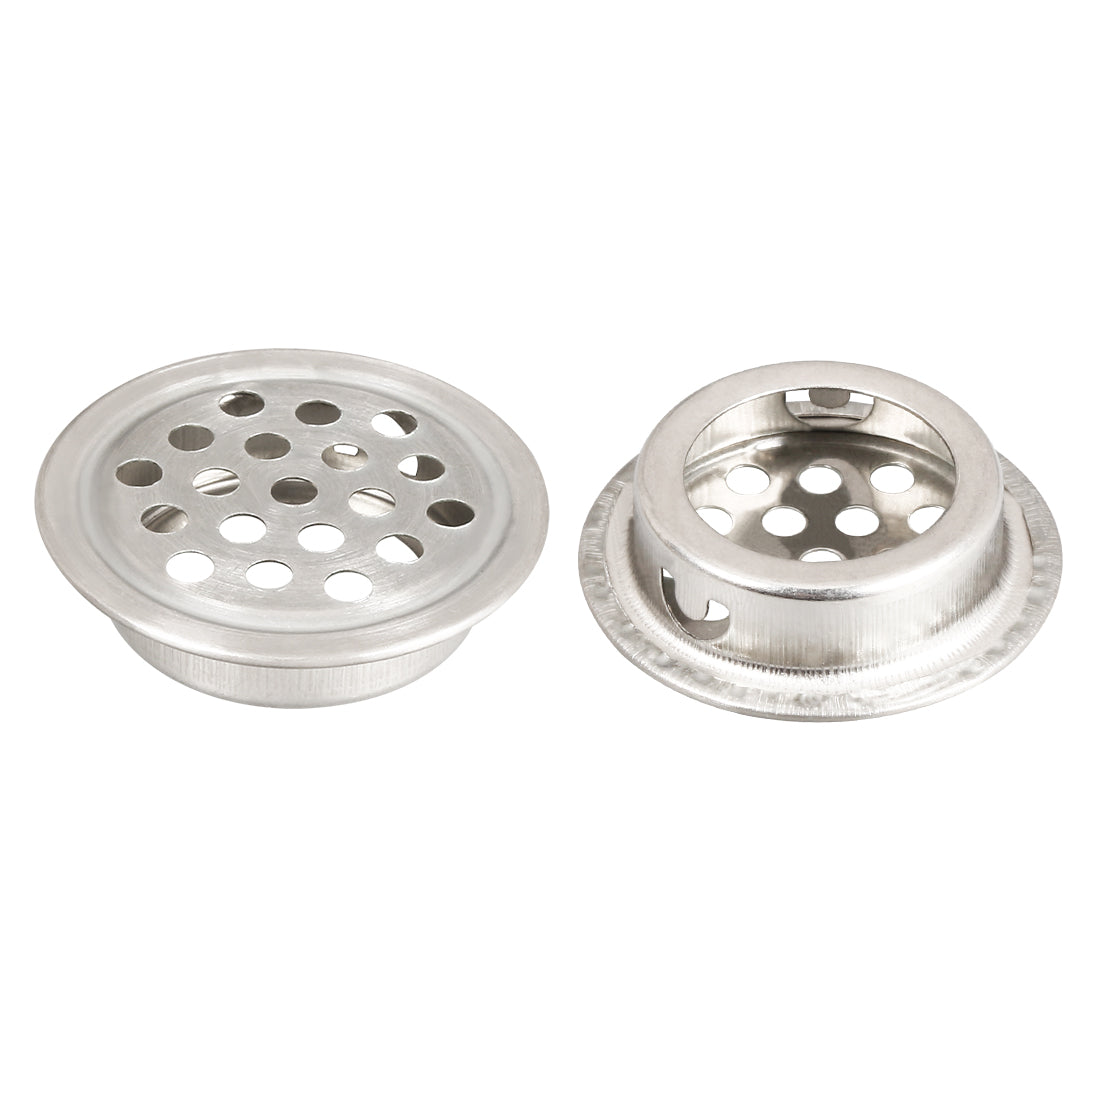 uxcell Uxcell Air Vent, 25mm Bottom Dia, 304 Stainless Steel, Round Shaped Mesh Hole Louver 4pcs